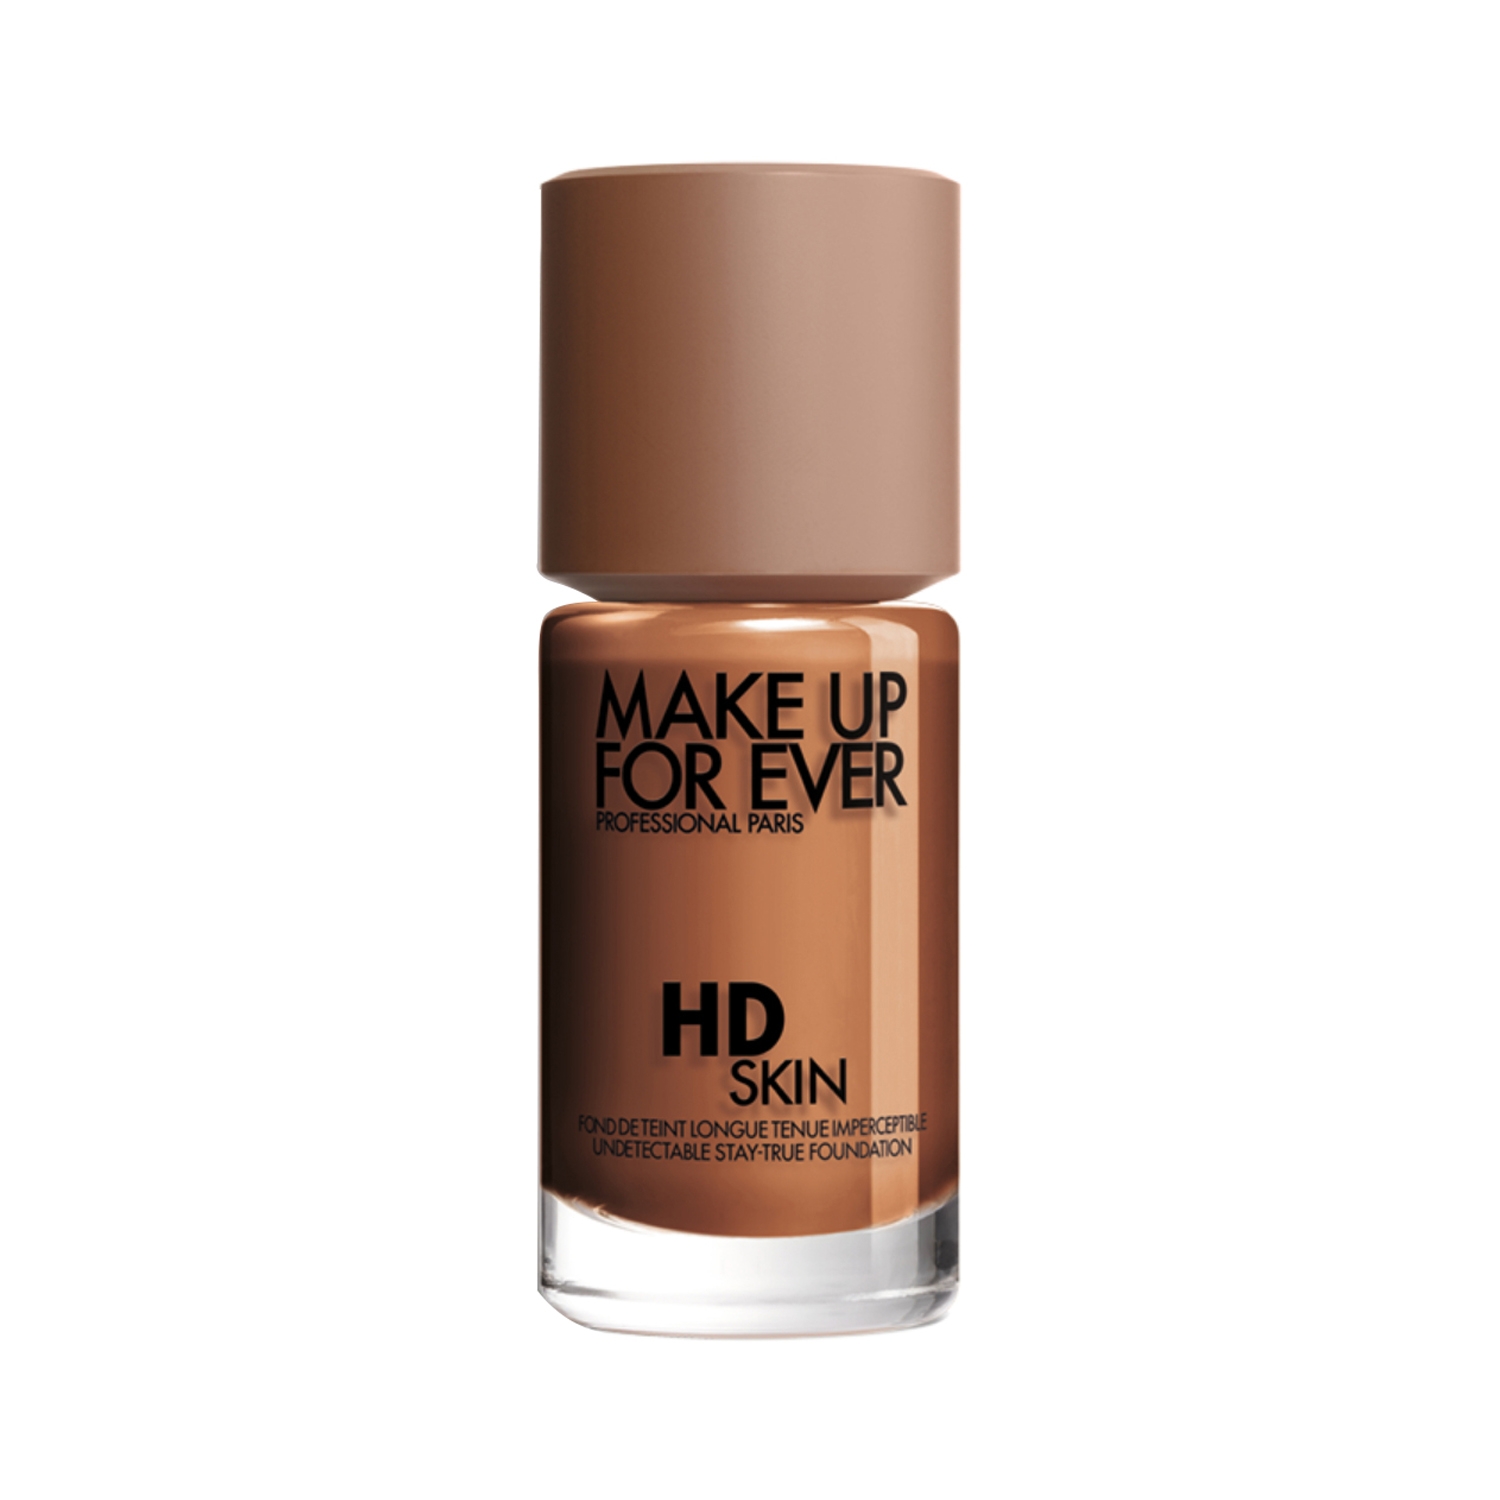 Make Up For Ever | Make Up For Ever Hd Skin Foundation-4N62 (Y505) (30ml)